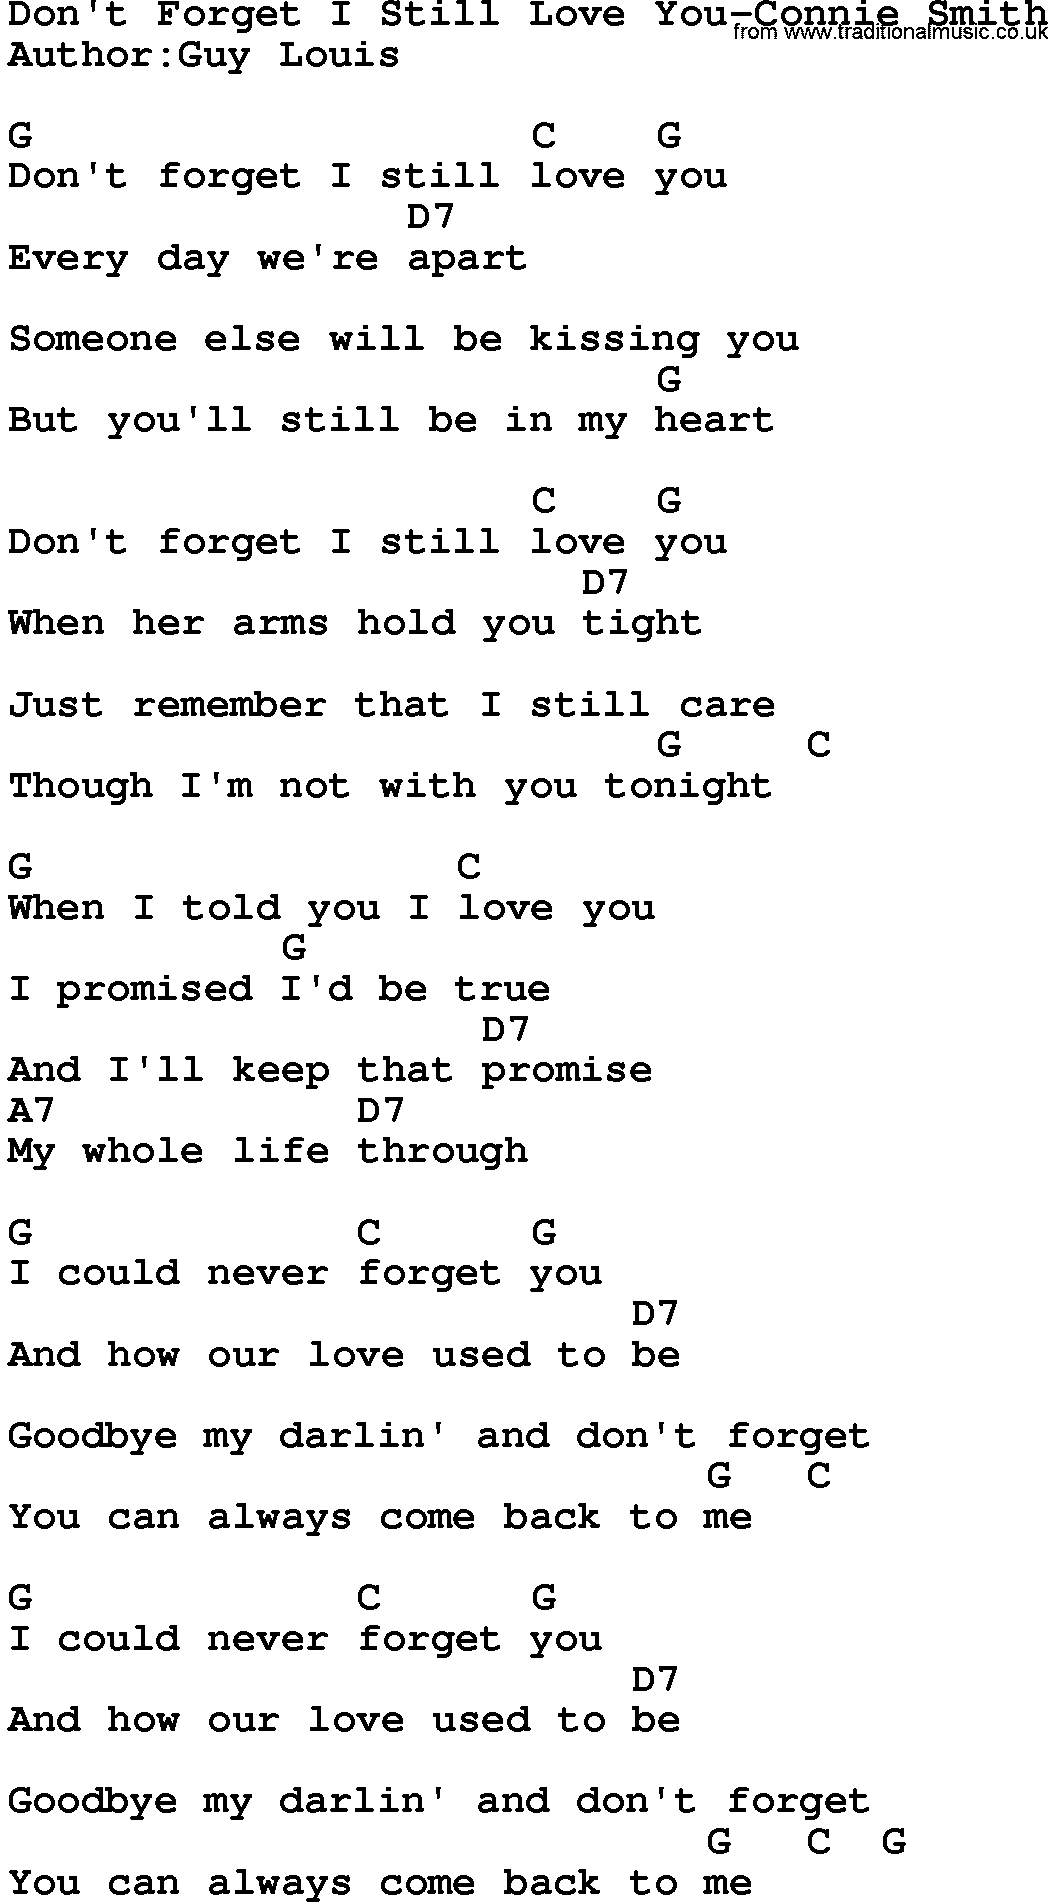 Country music song: Don't Forget I Still Love You-Connie Smith lyrics and chords